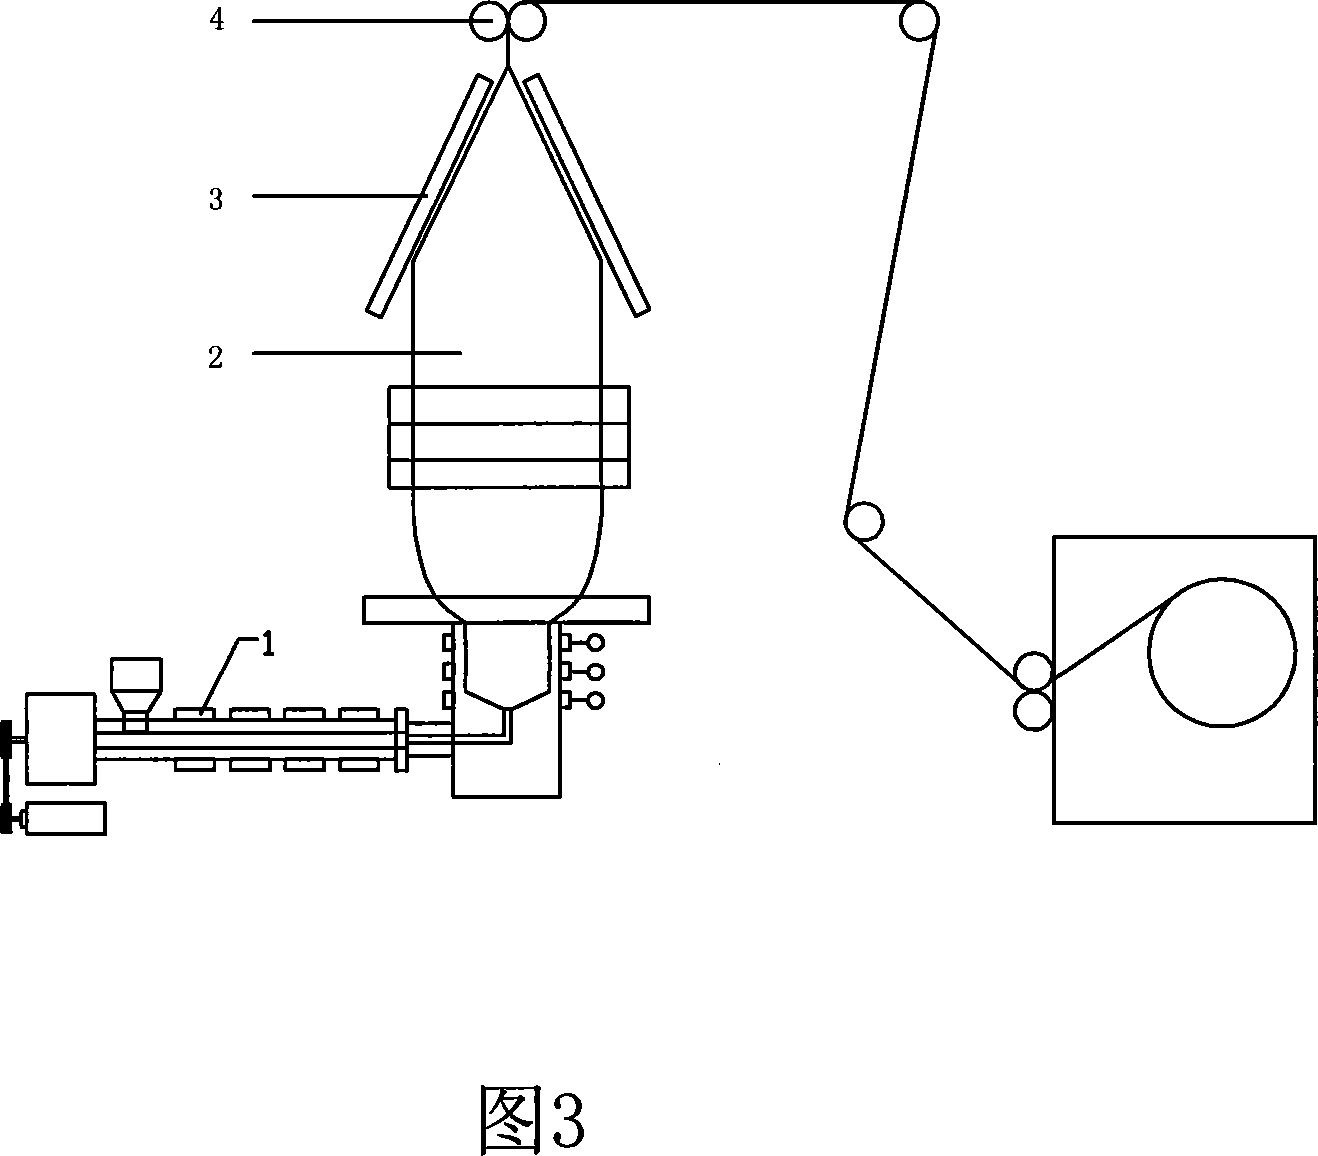 Process and apparatus for producing packing plastic material